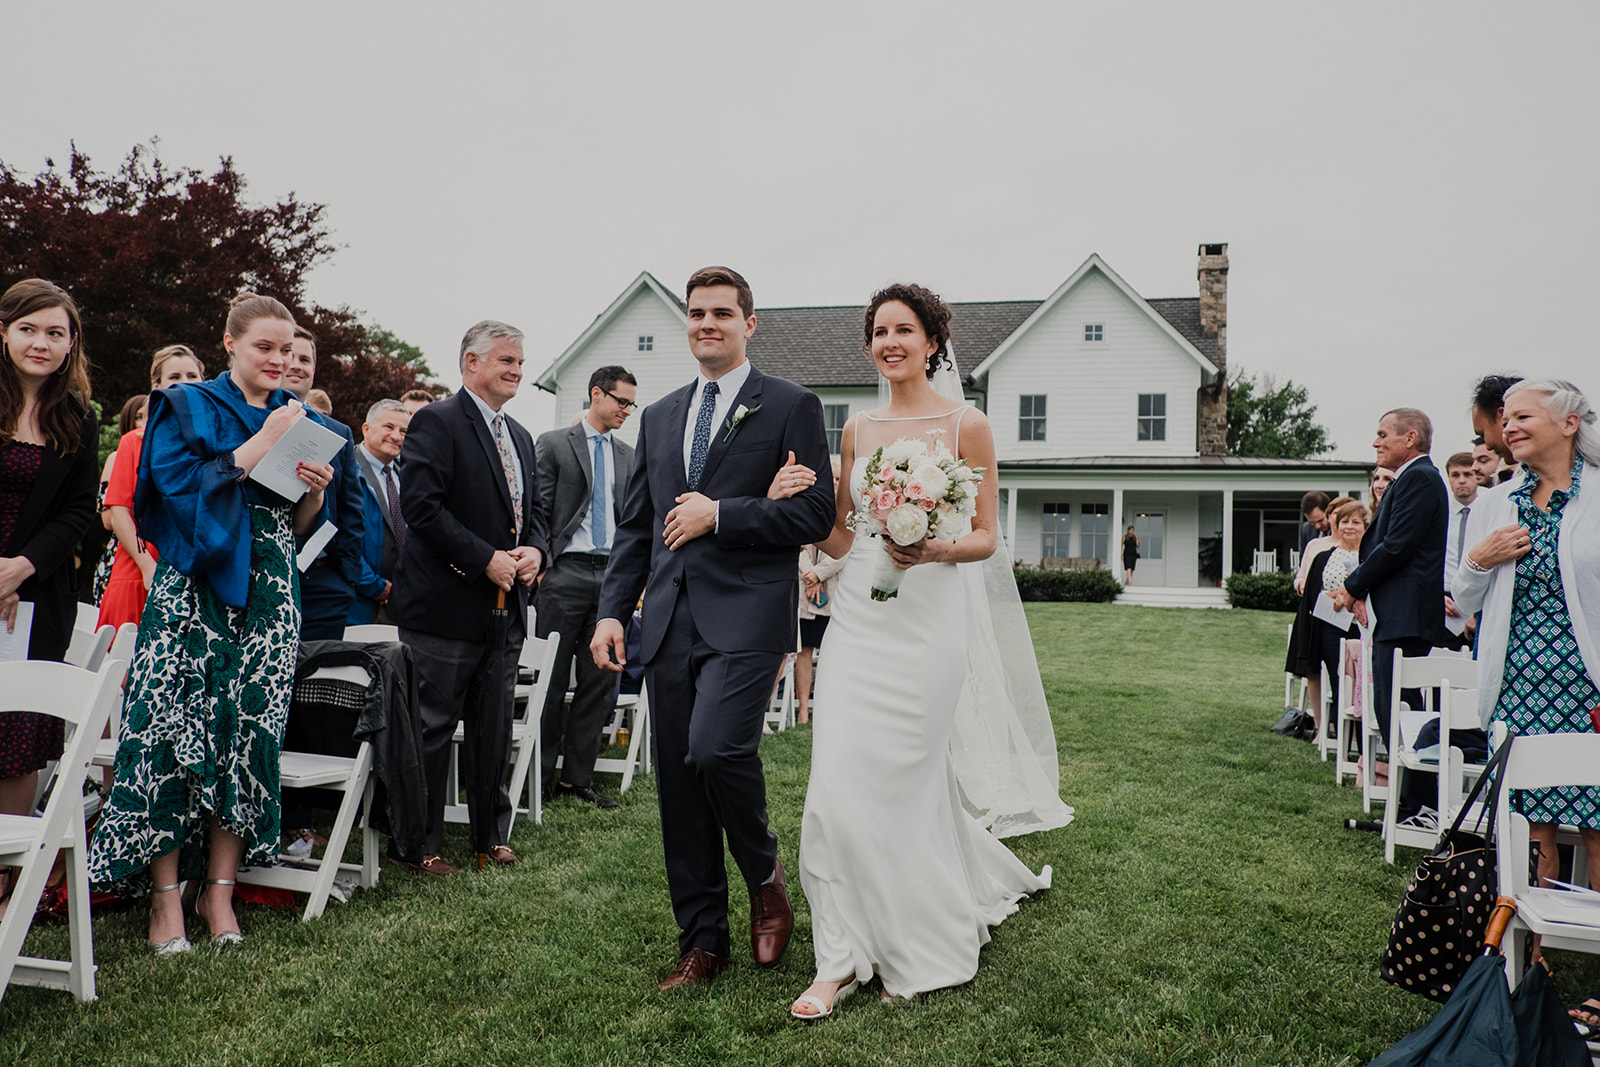 A bride is escorted by her brother down the aisle of her outdoor wedding at Blue Hill Farm in Waterford, VA.